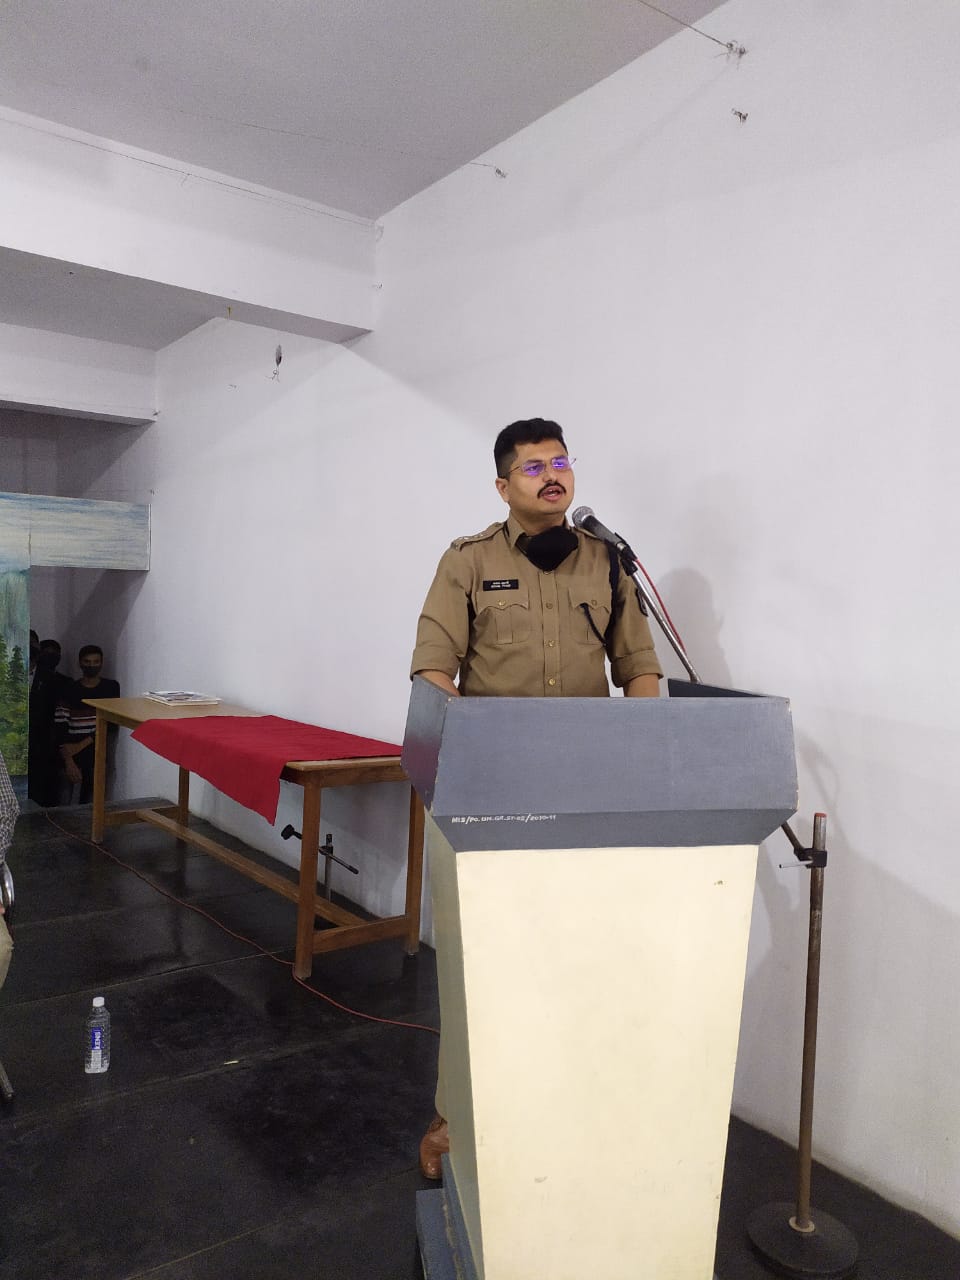 AN ENCOURAGING VISIT OF IPS OFFICER ACHAL TYAGI